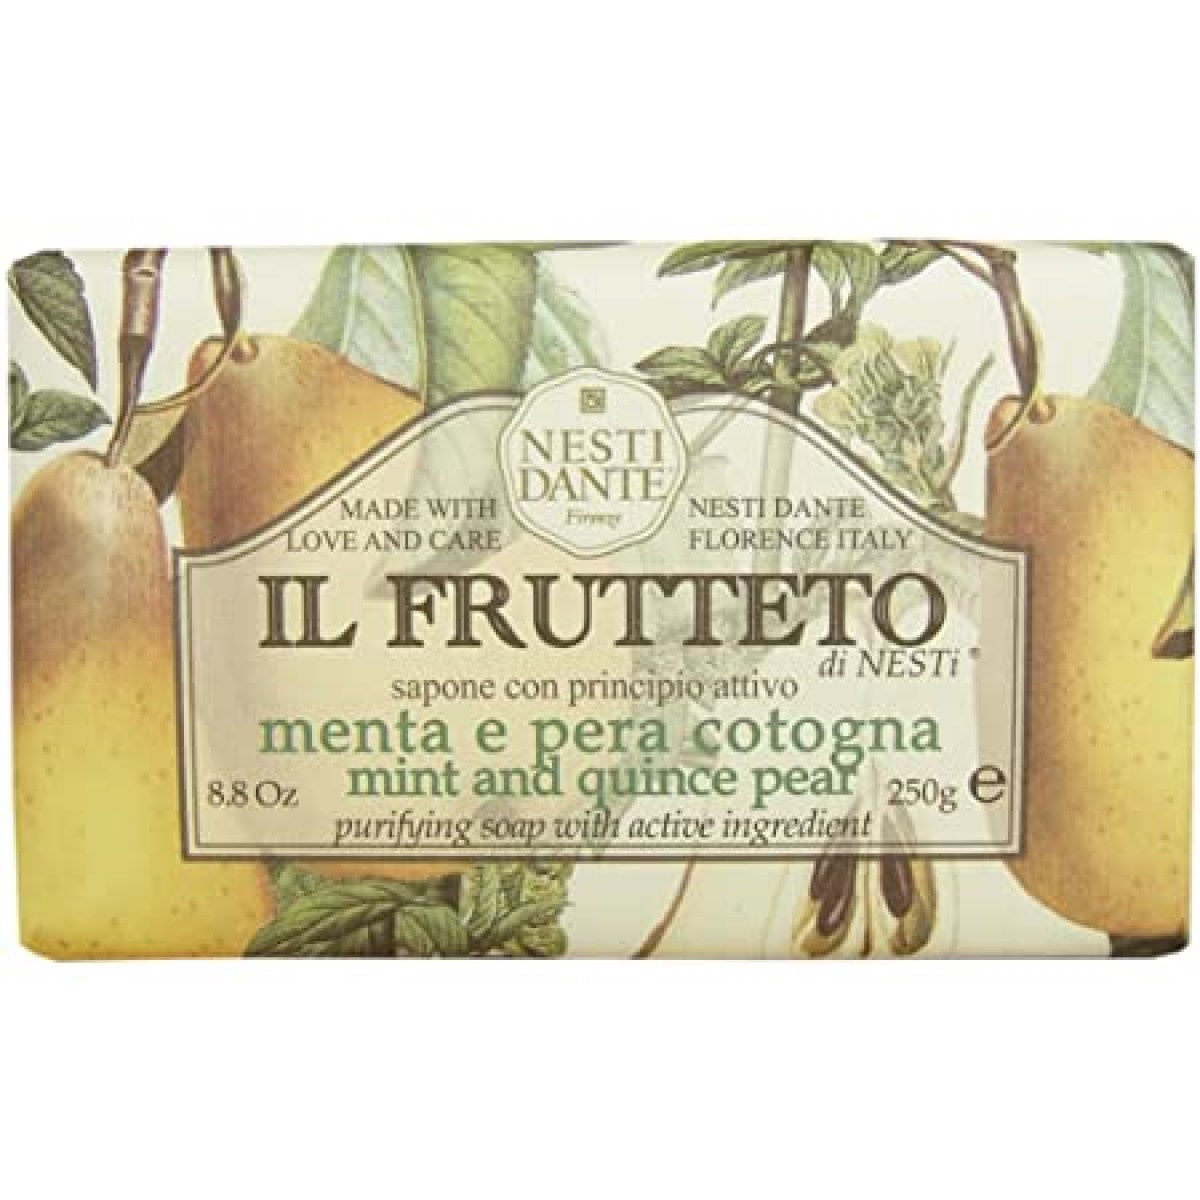 Primary Image of Il Frutteo Mint and Quince Pear Soap